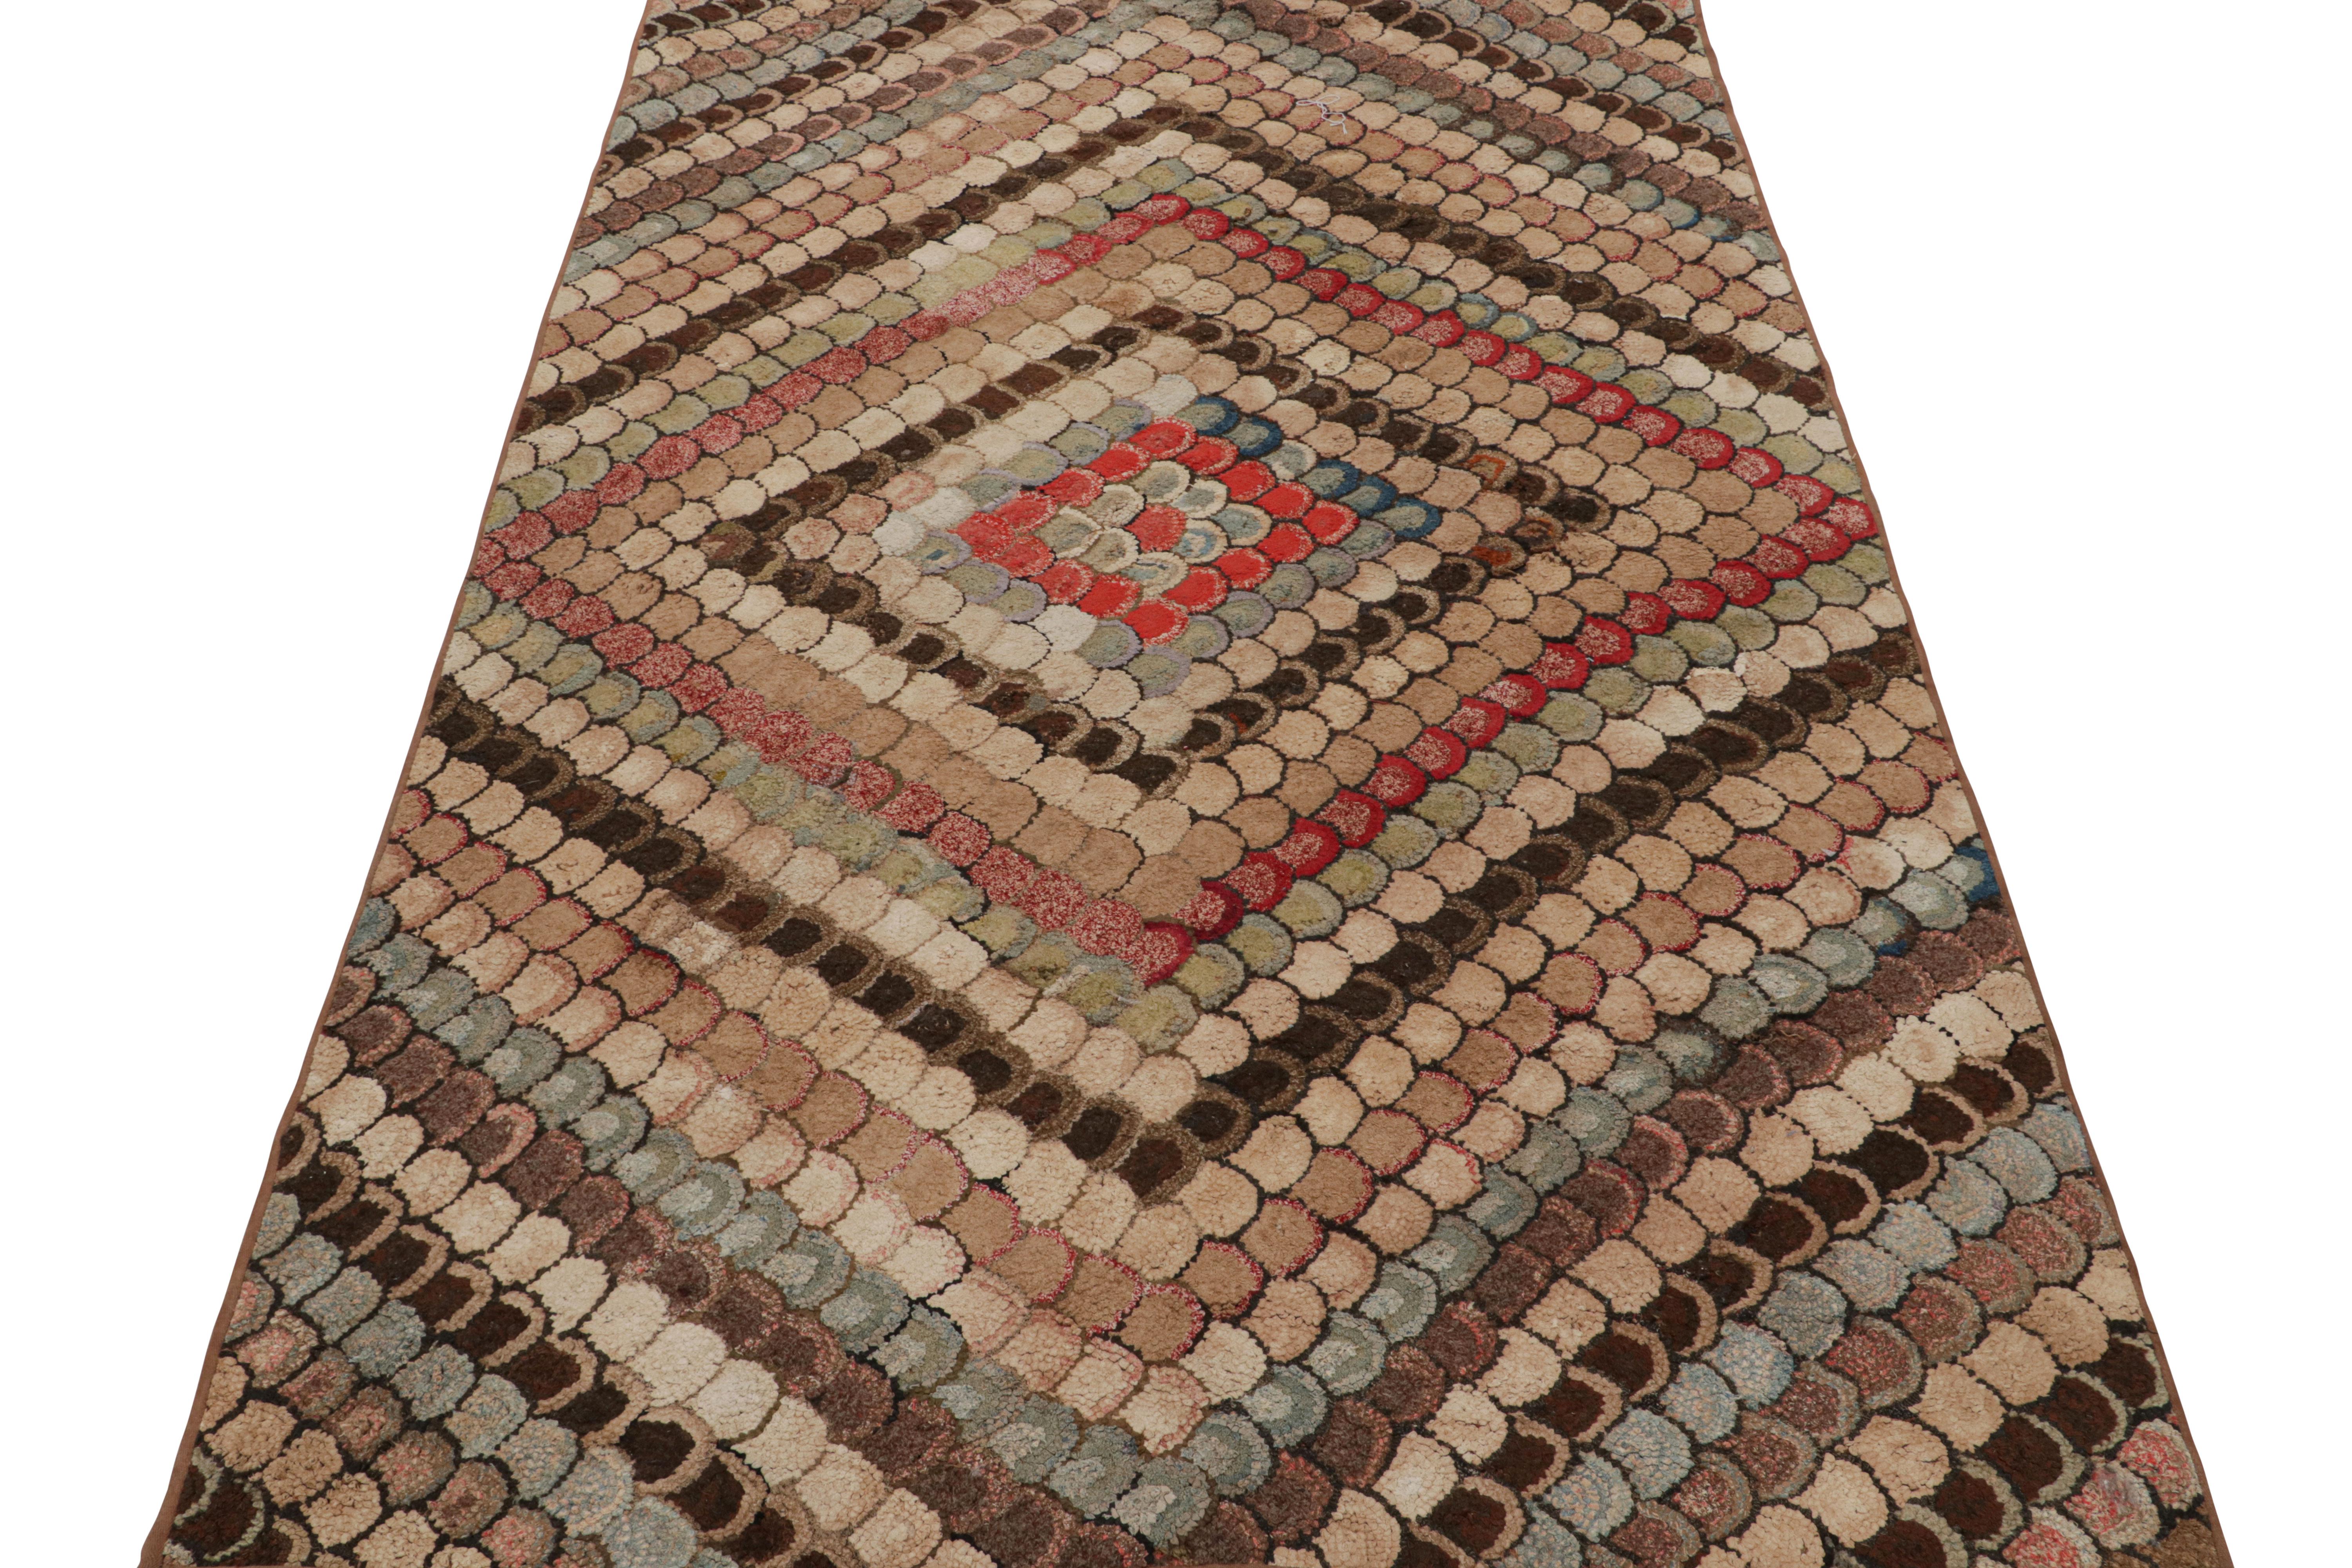 American Antique Hooked Rug with Polychromatic Chevron Patterns, from Rug & Kilim For Sale